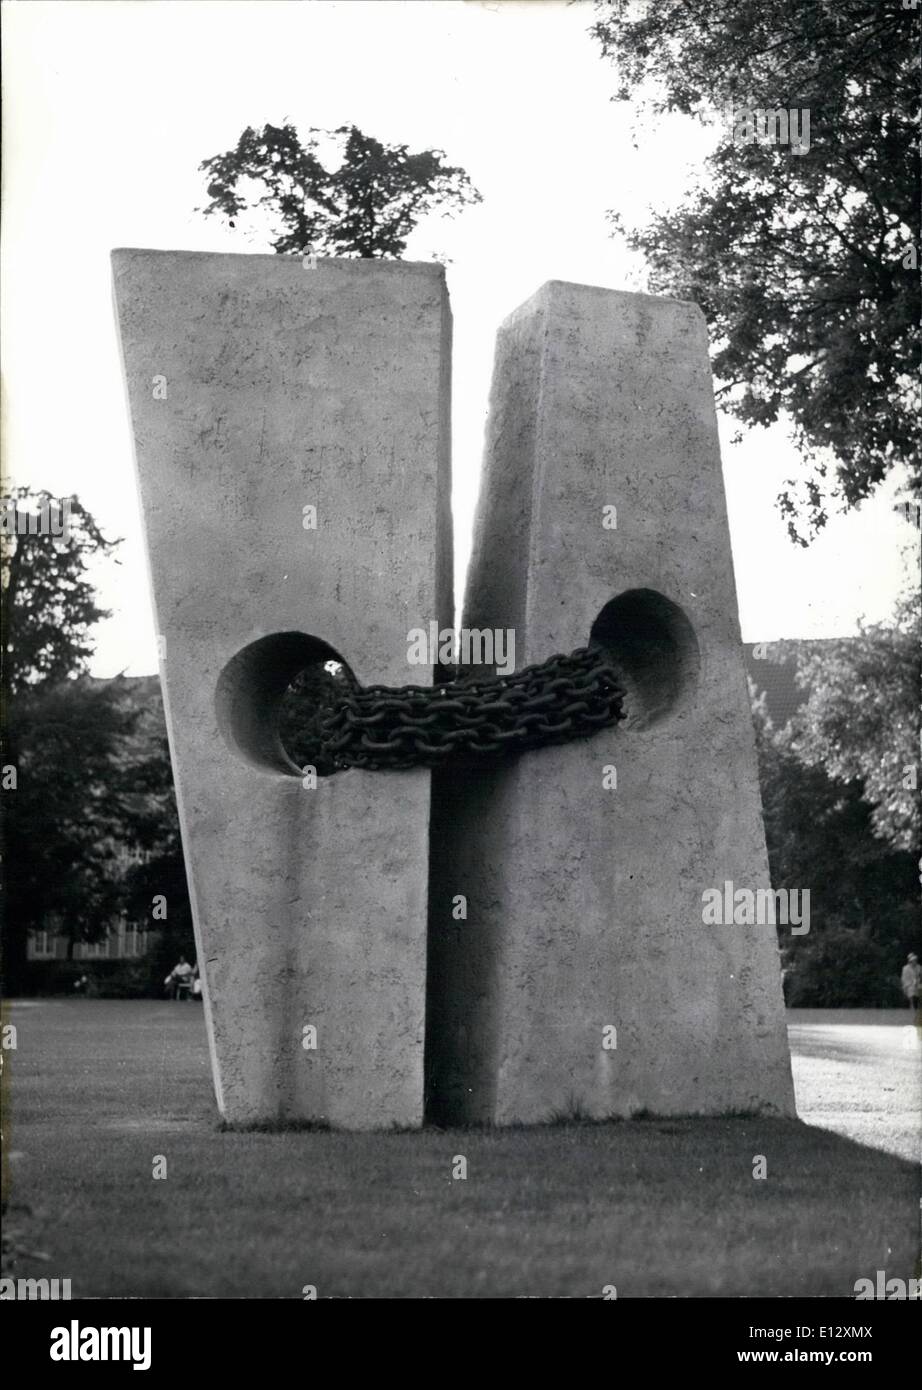 Feb. 26, 2012 - Monument demanding the German unity. This monument standing in Munster (Westfalia, Northern Germany) demands the unity of Germany. The sculpture shows two concrete boulders united by iron chains, symbolizing the parted Germany. It was made under co-operation of the Art School of Munster. Keystone Munich, 14-8-61 Stock Photo